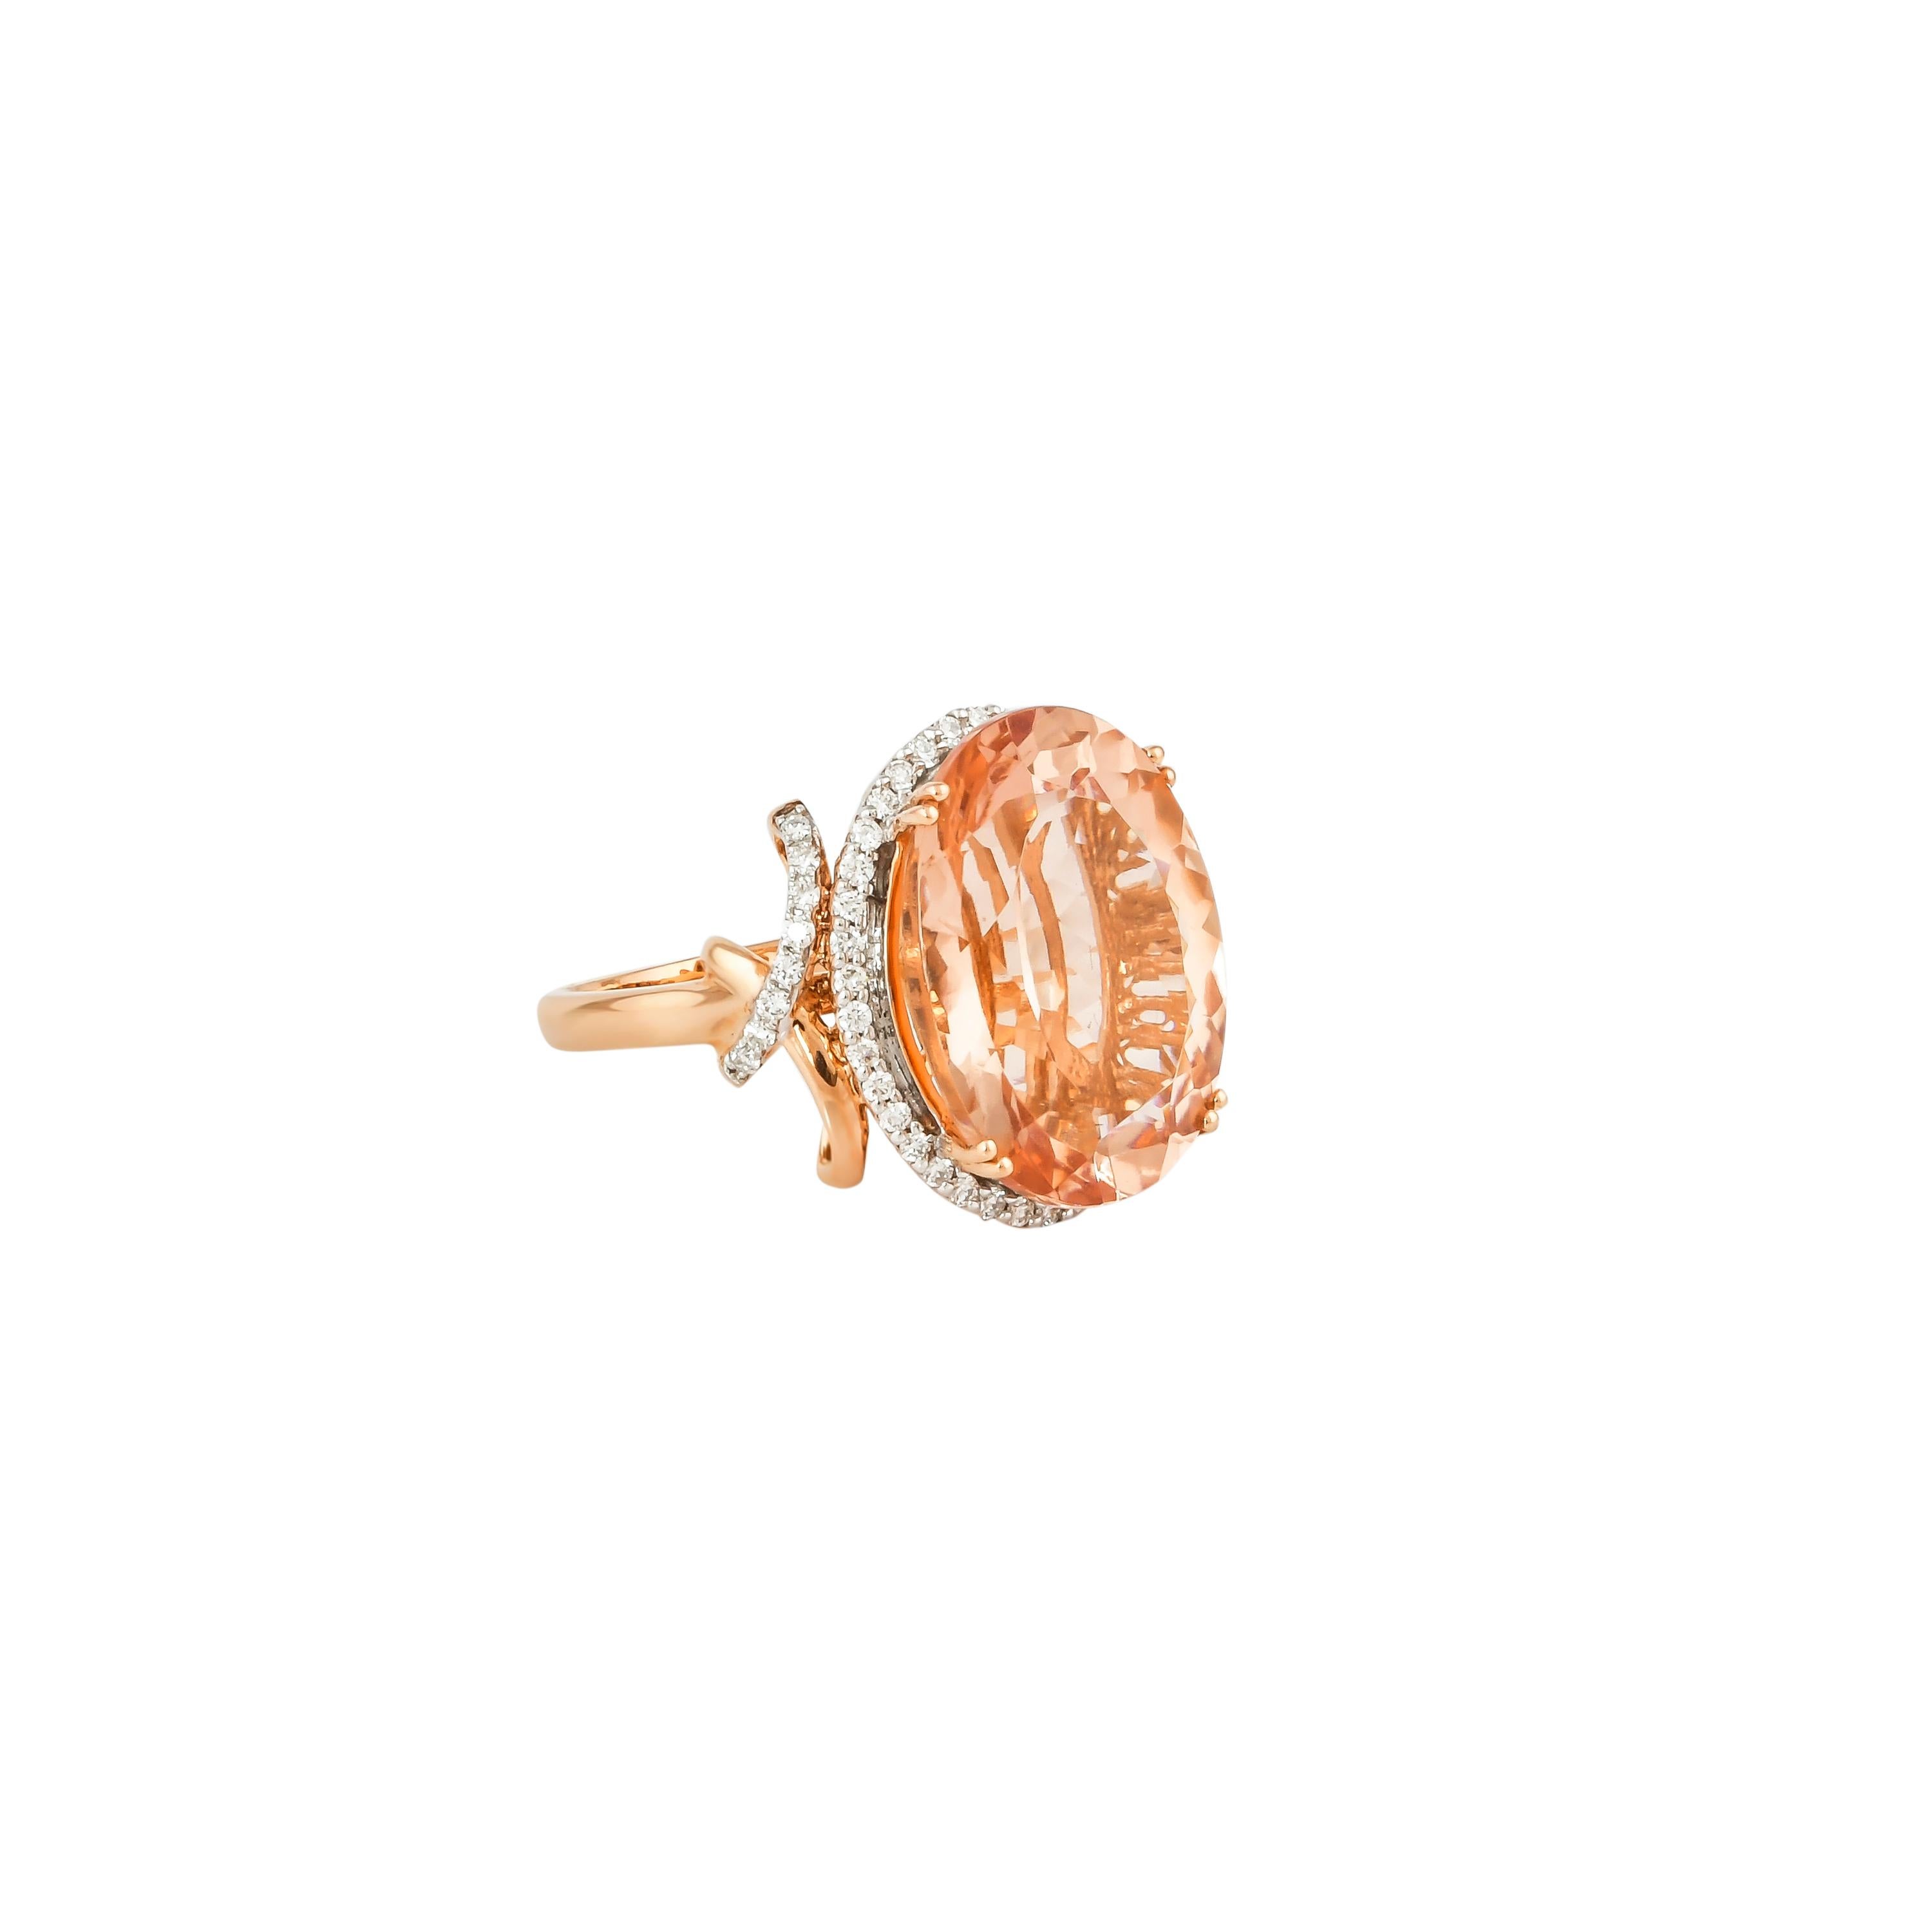 This collection features an array of magnificent morganites! Accented with diamonds these rings are made in rose gold and present a classic yet elegant look. 

Classic morganite ring in 18K rose gold with diamonds. 

Morganite: 12.03 carat oval